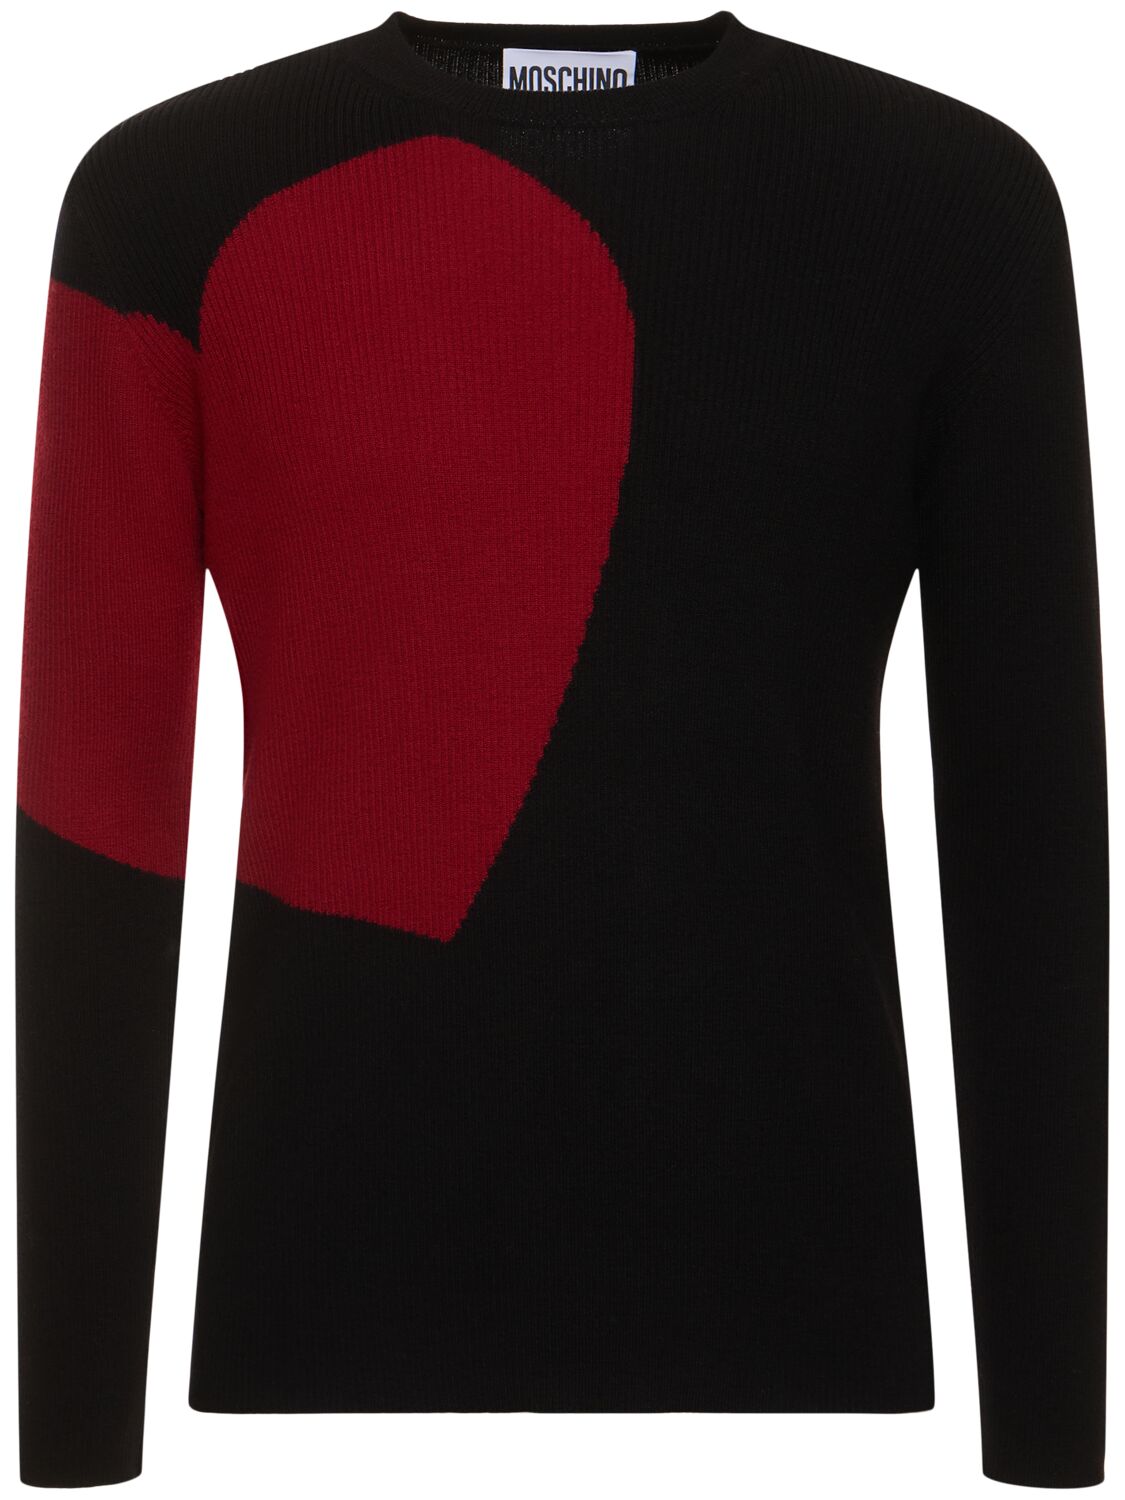 Moschino Archive Graphics Knit Sweater In Black,red